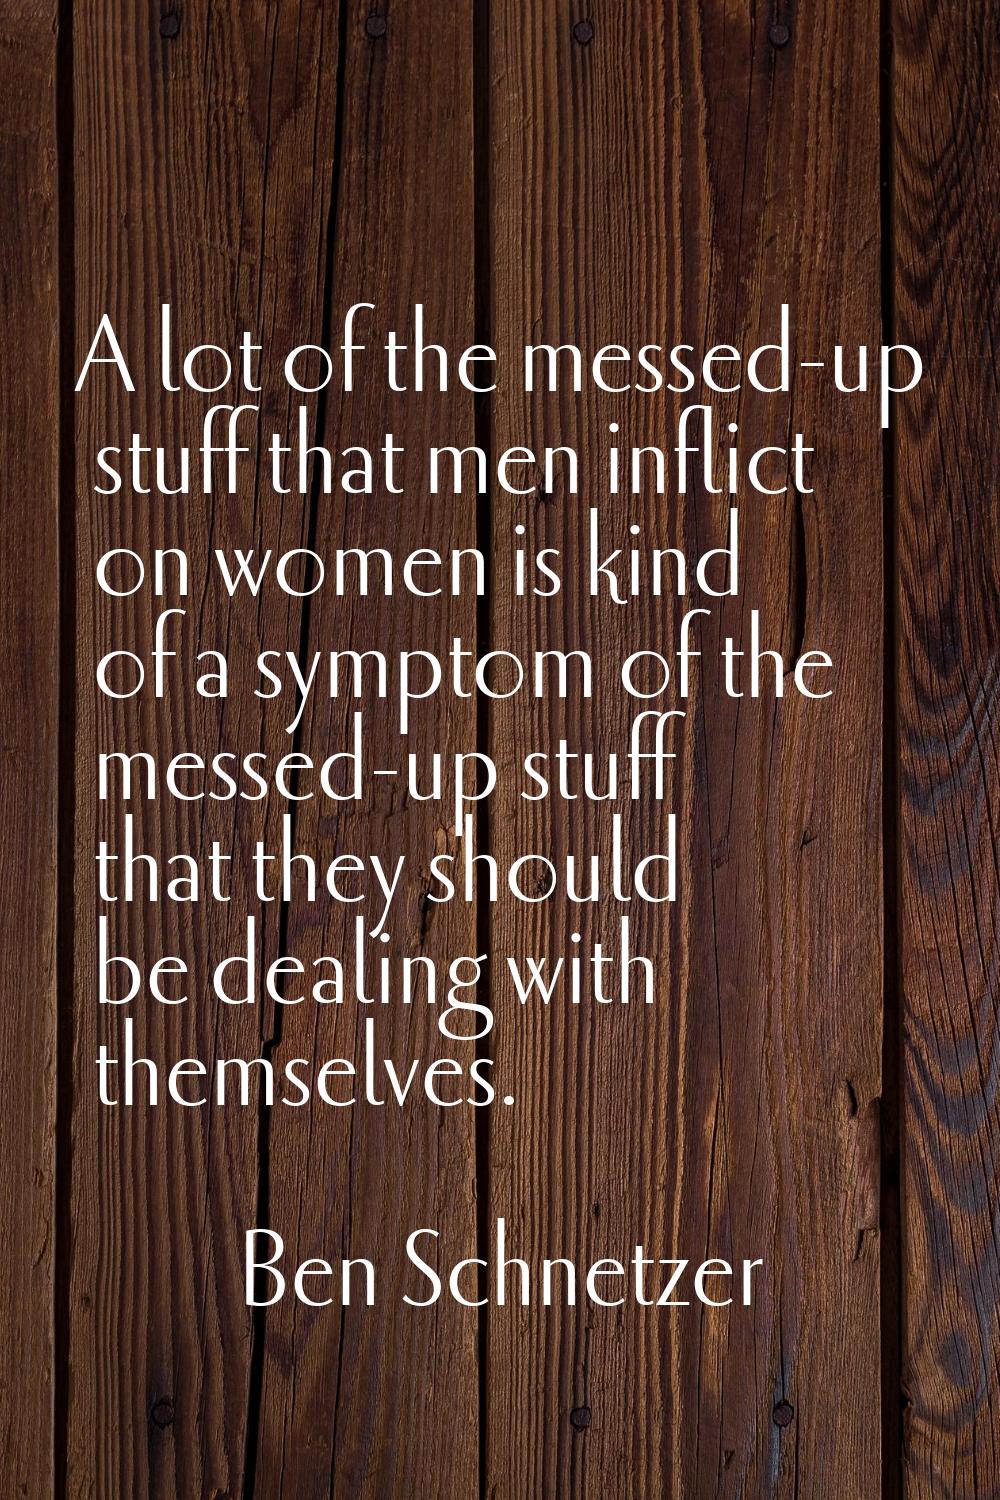 A lot of the messed-up stuff that men inflict on women is kind of a symptom of the messed-up stuff 